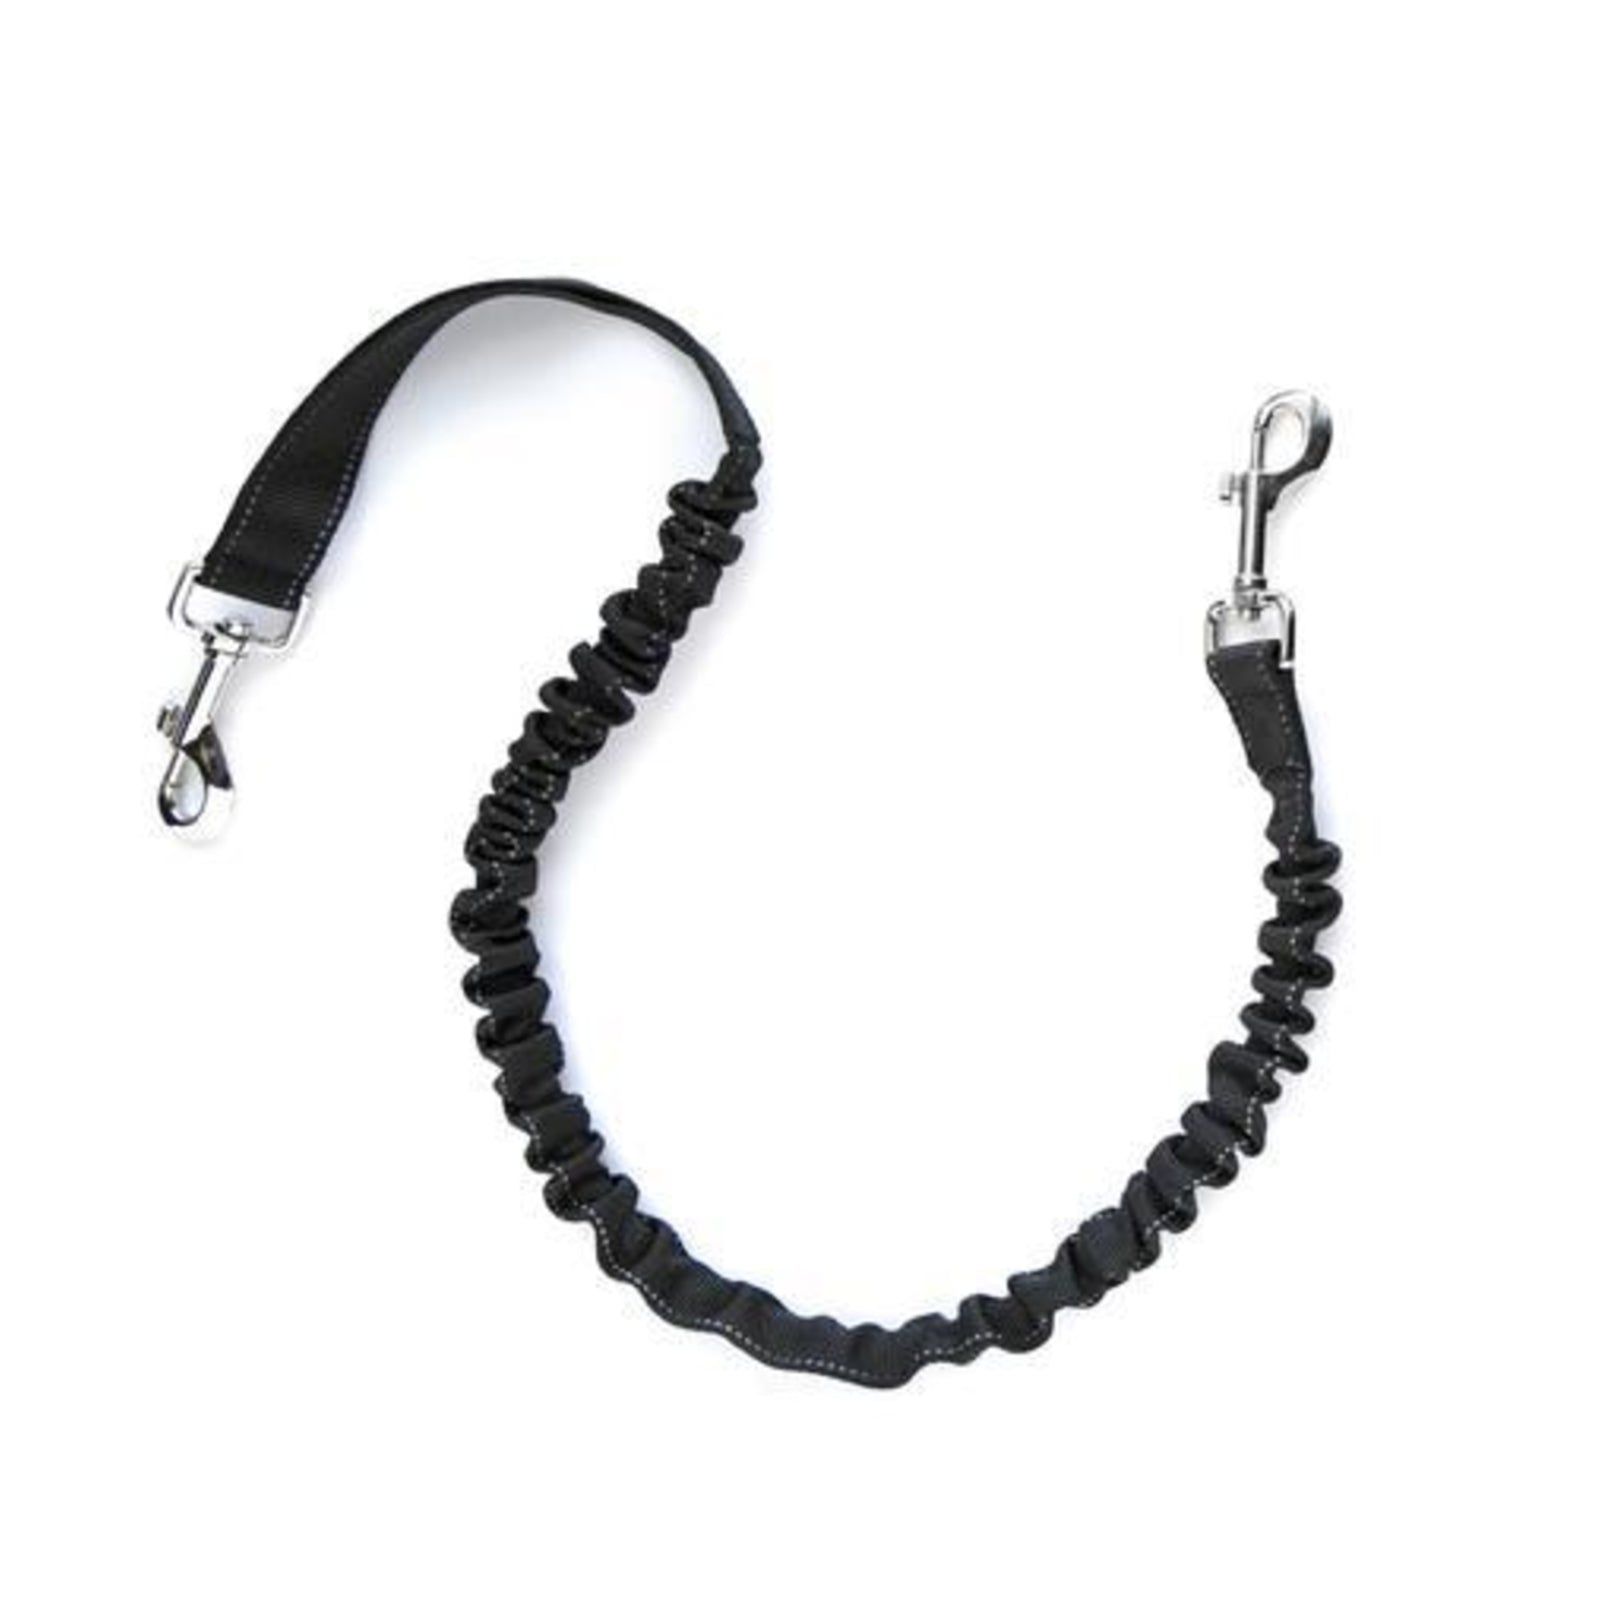 Mighty Paw Hands Free Bungee Leash for Active Dog Owners